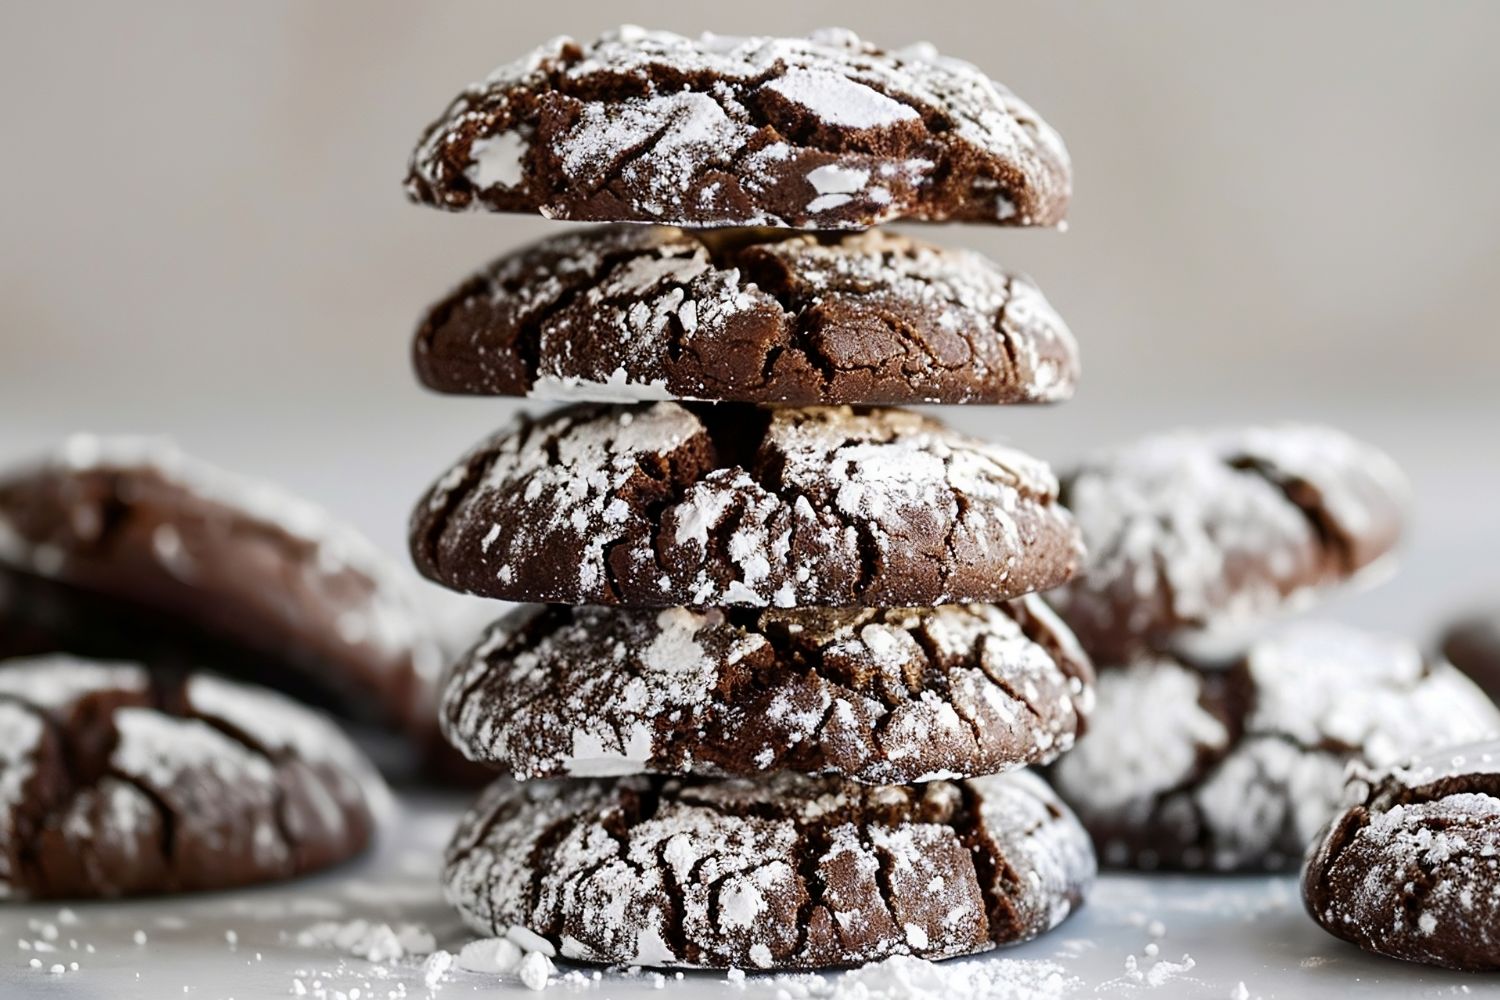 Stack of Chocolate Crinkle Cookies with Powdered Sugar on a White Marble Table and More Chocolate Crinkle Cookies in the Background